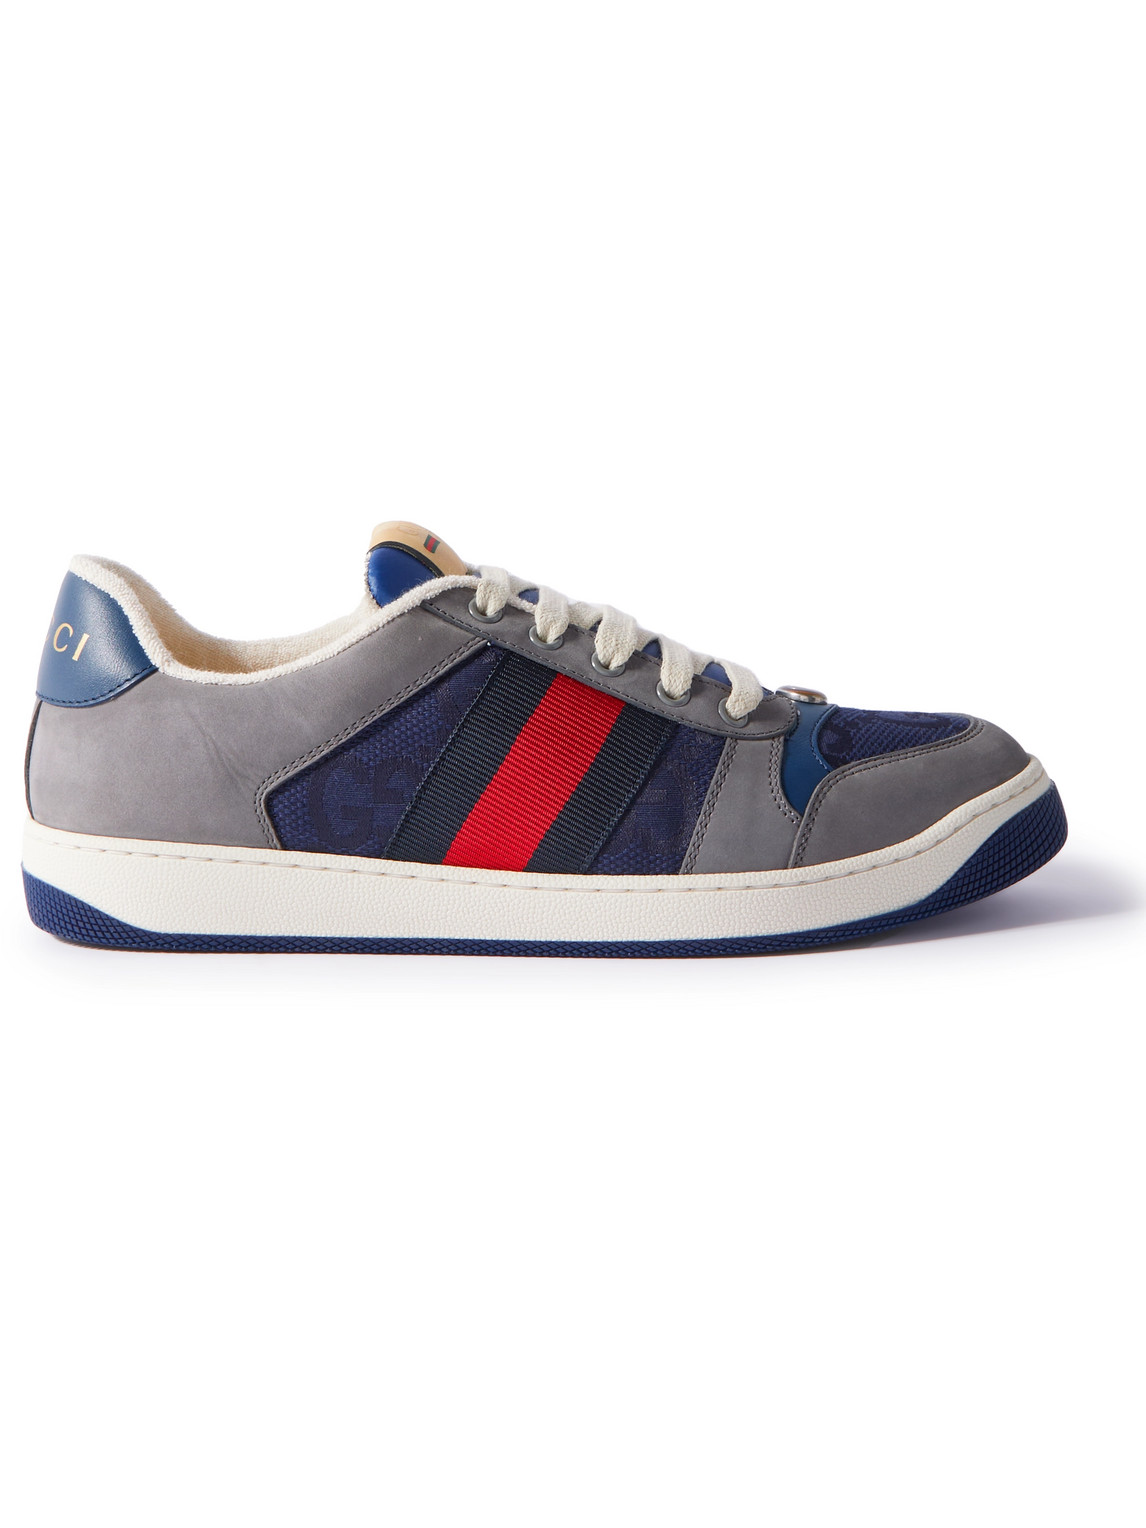 Gucci - Screener Monogrammed Canvas And Webbing-Trimmed Suede And Leather  Sneakers - Men - Blue - UK 6 for Men